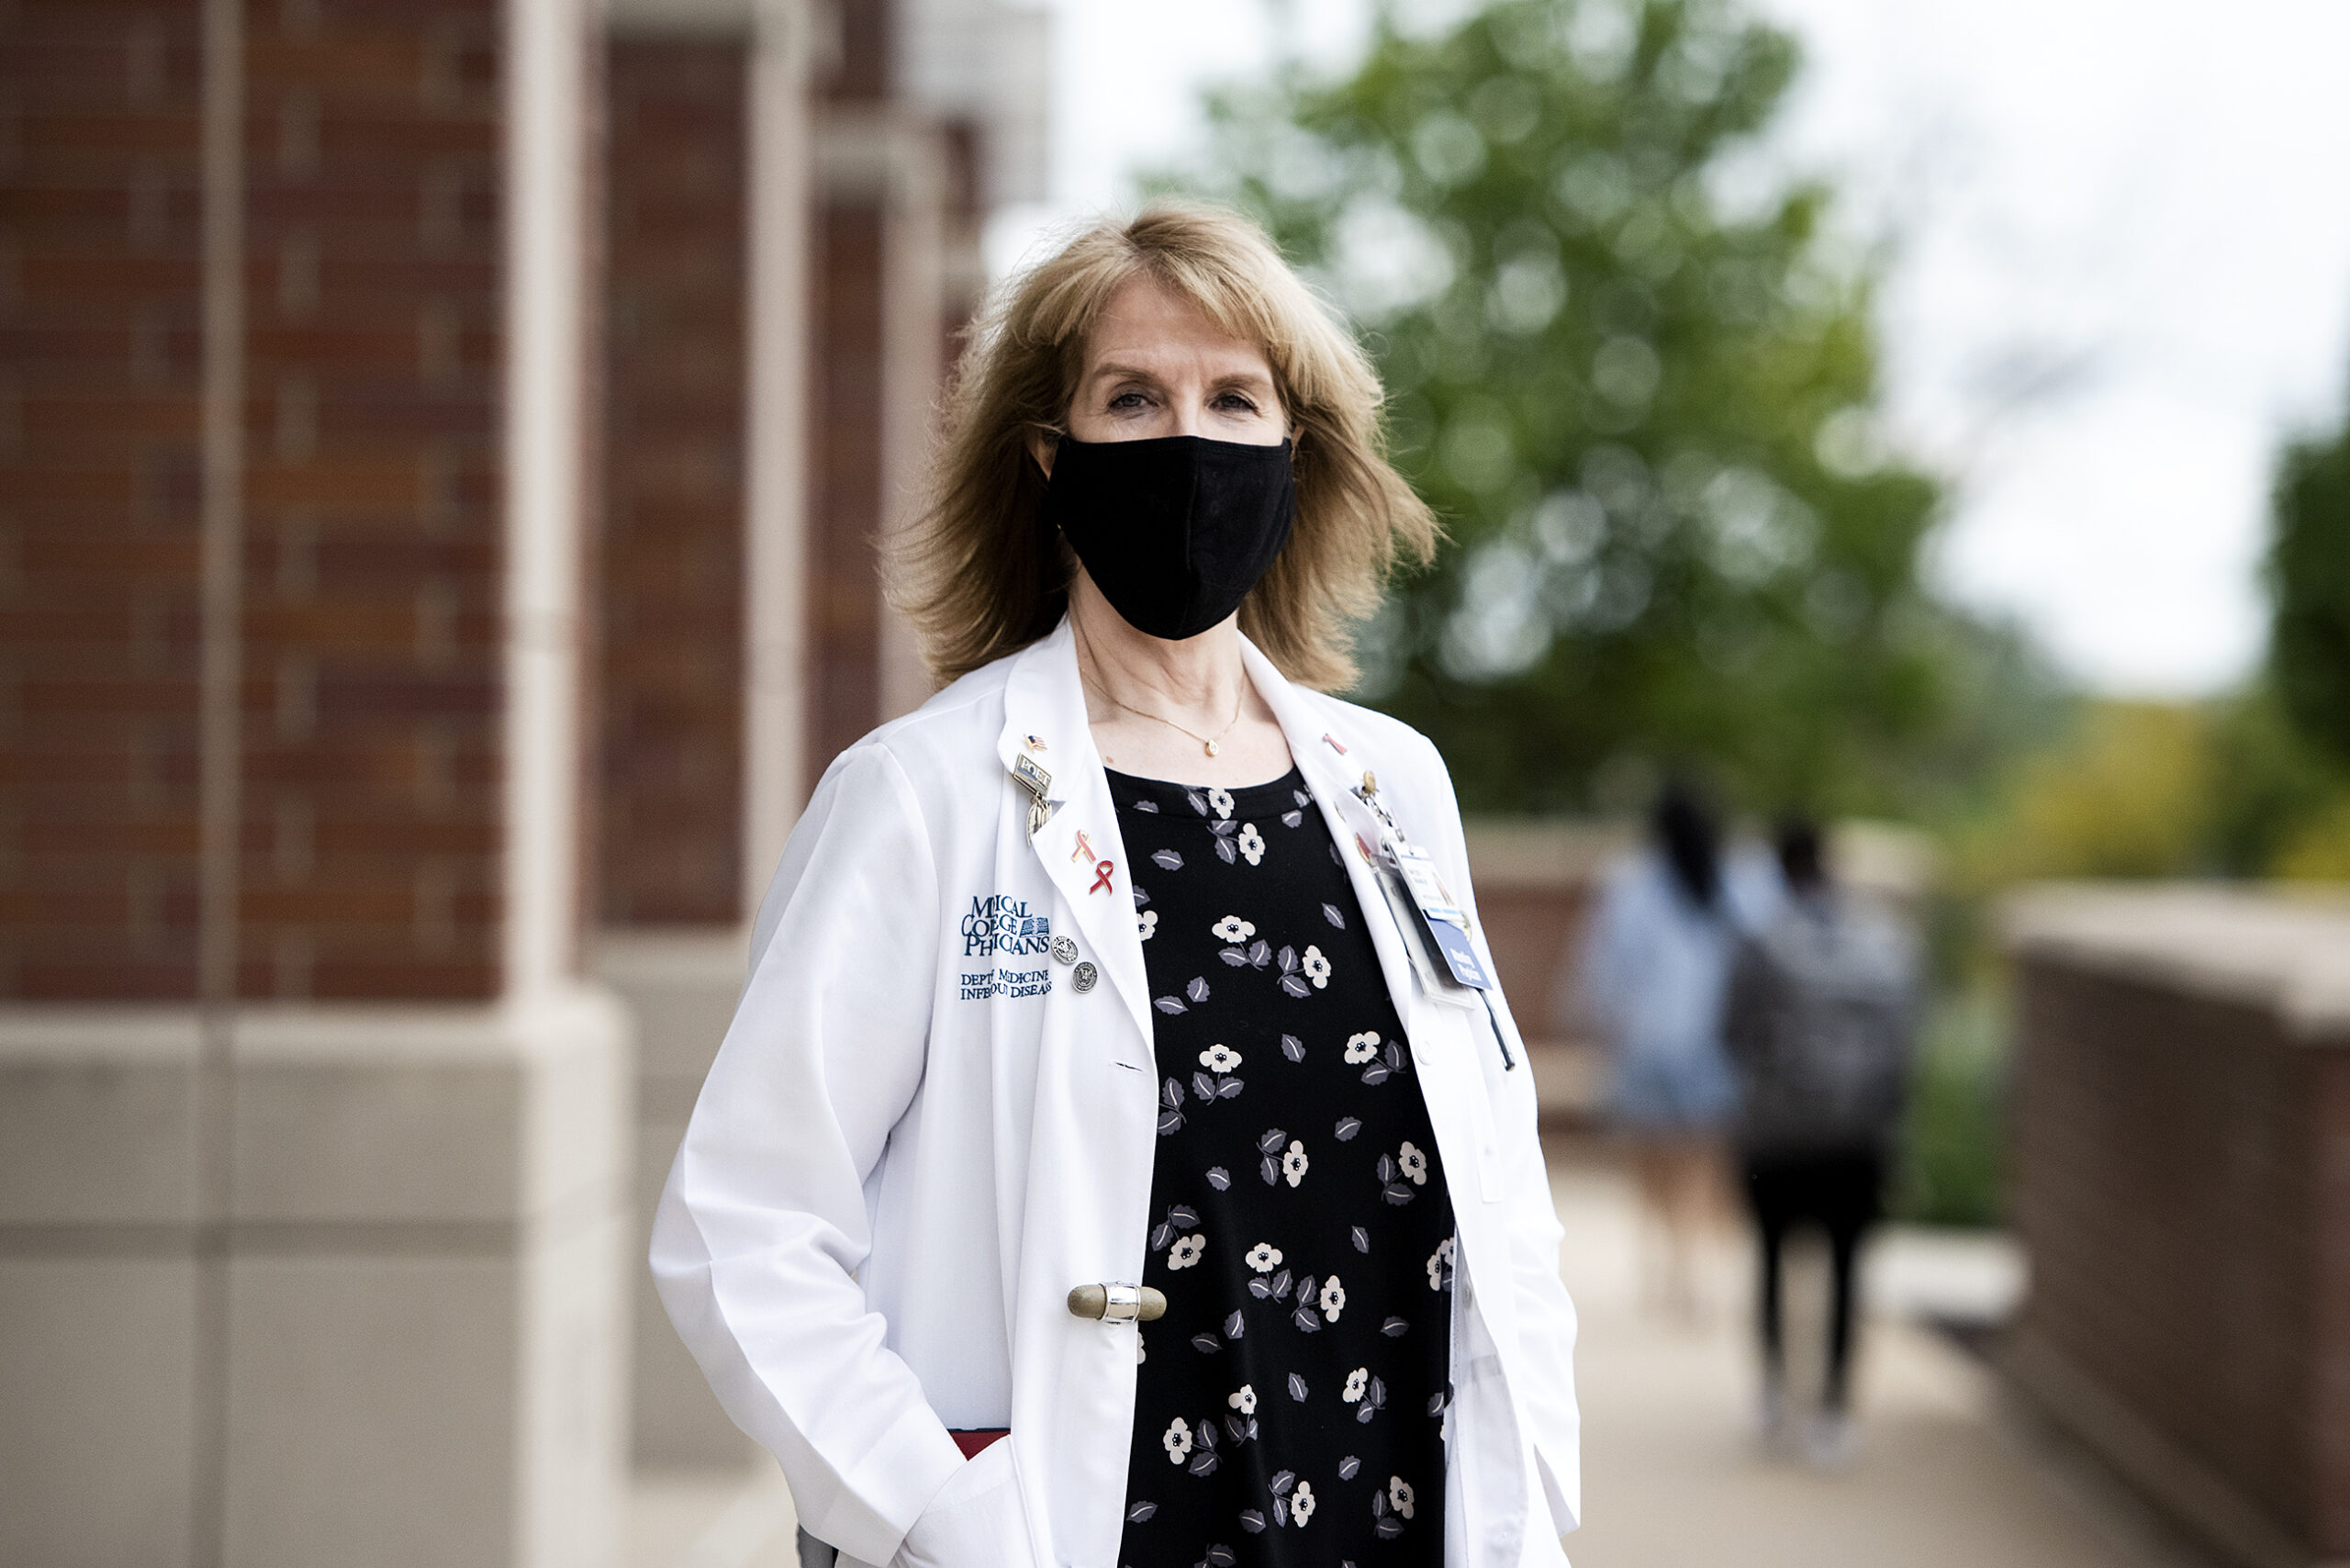 A woman in a white coat and black face mask stands outside as people walk past